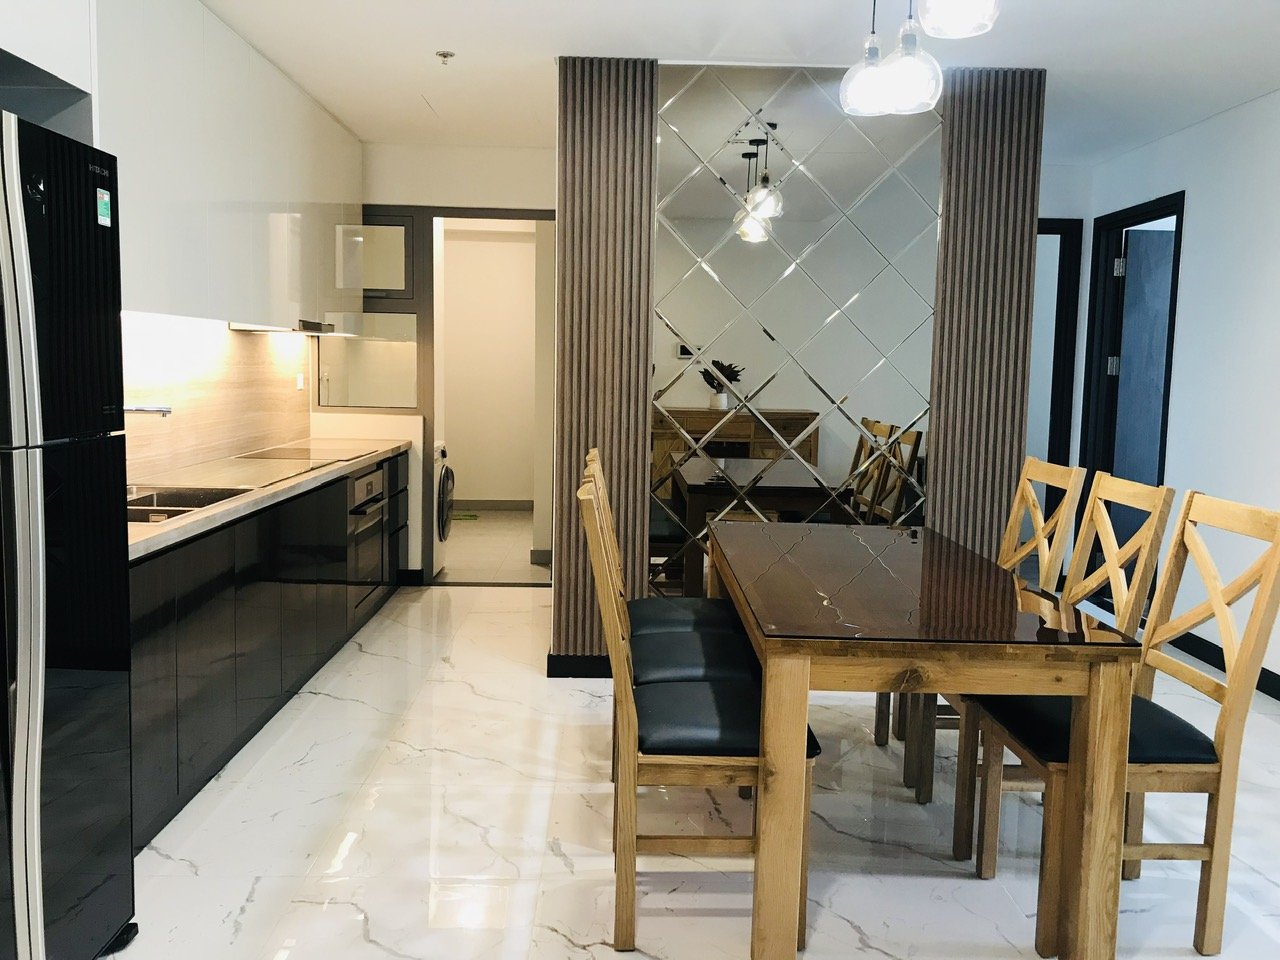 Empire city for rent, 1400$ 92m2 full furnished apartment 3